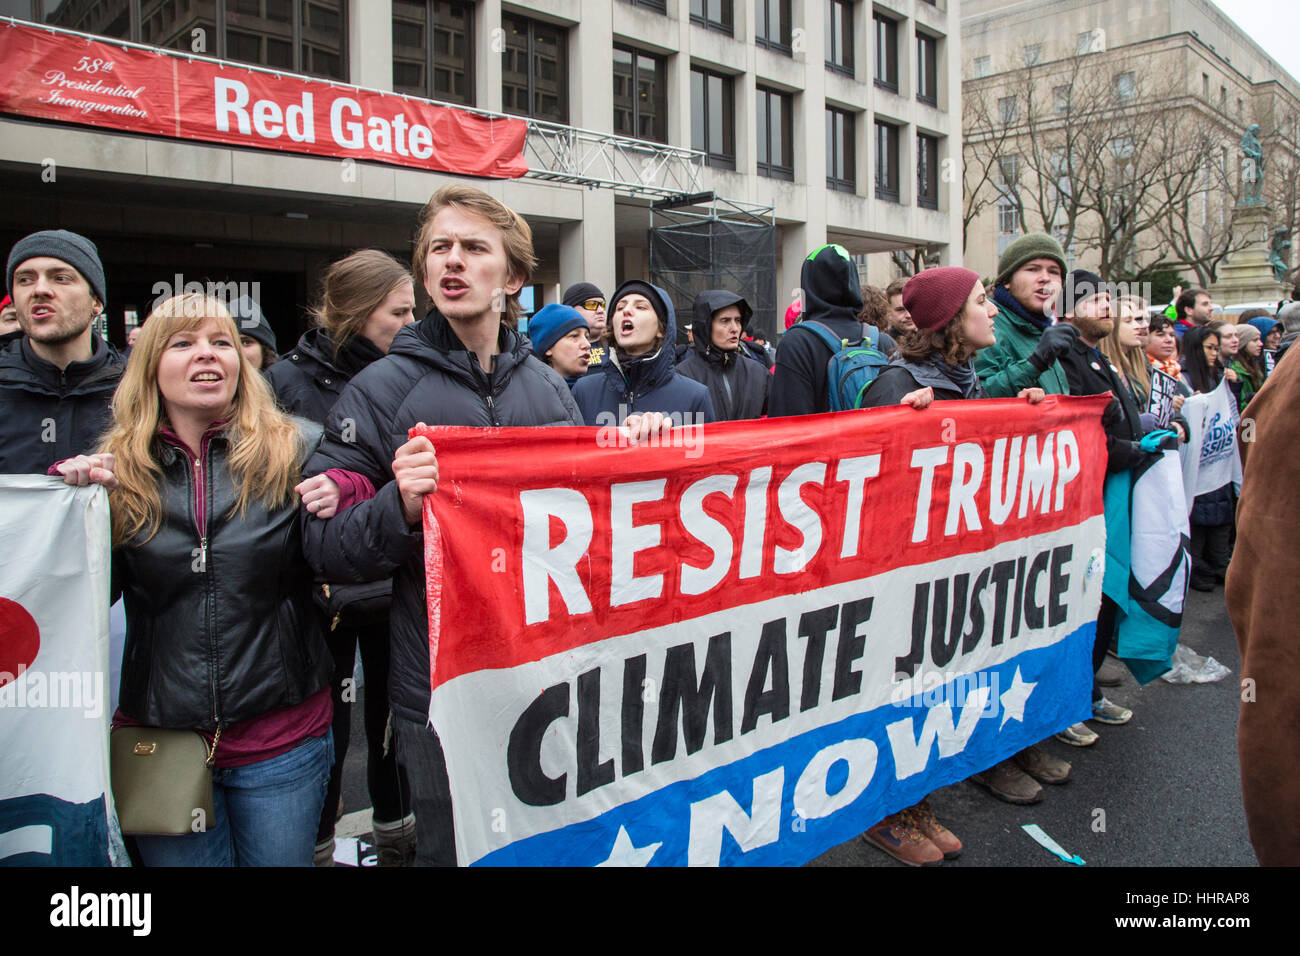 Washington, USA. 20th January, 2017.  Protesters at the inauguration of President Donald Trump. Climate Justice activists blocked one of the security checkpoints leading to the inauguration. Credit: Jim West/Alamy Live News Stock Photo